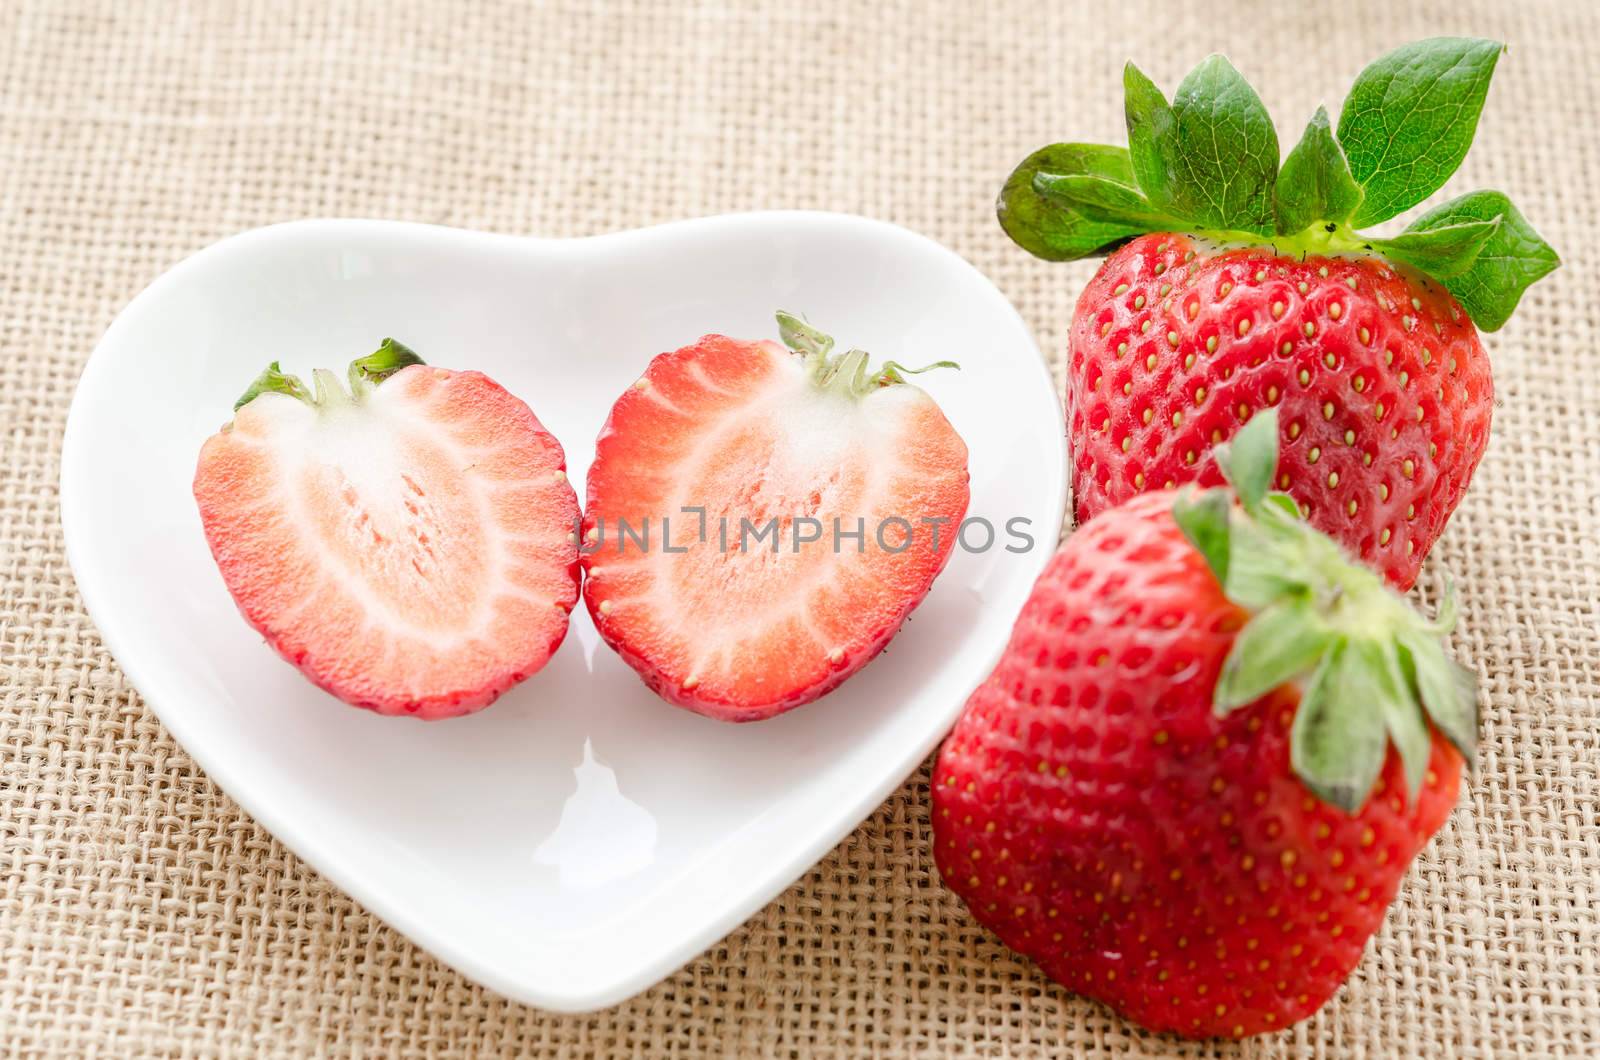 Ripe sweet strawberries in white bowl on sack background.